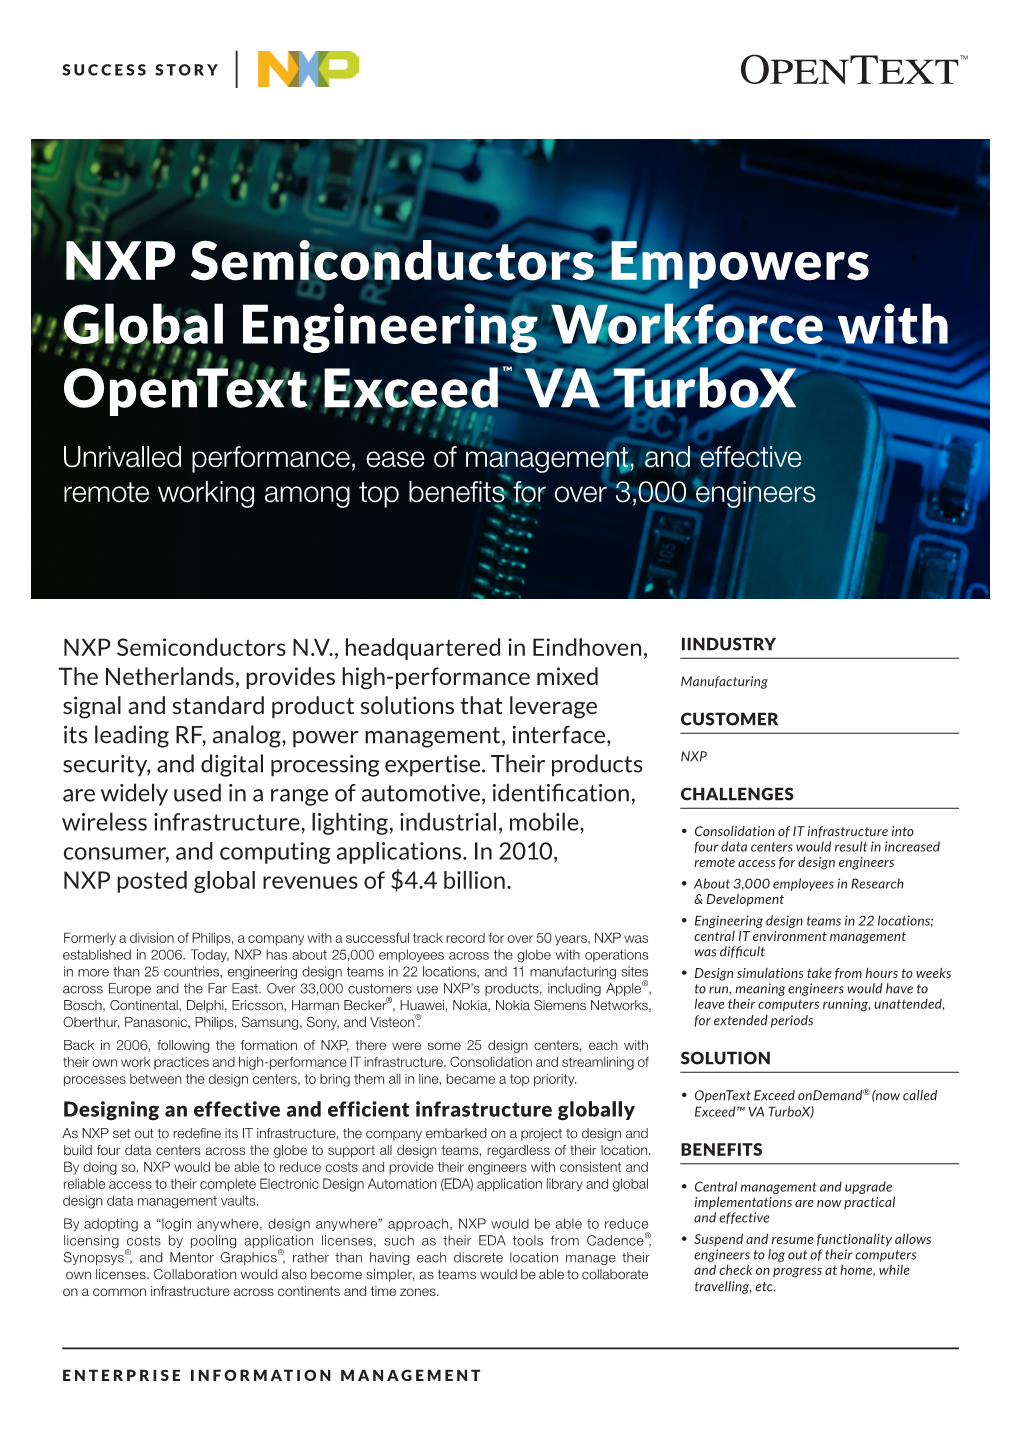 NXP Semiconductors Empowers Global Engineering Workforce with Opentext Exceed™ VA Turbox